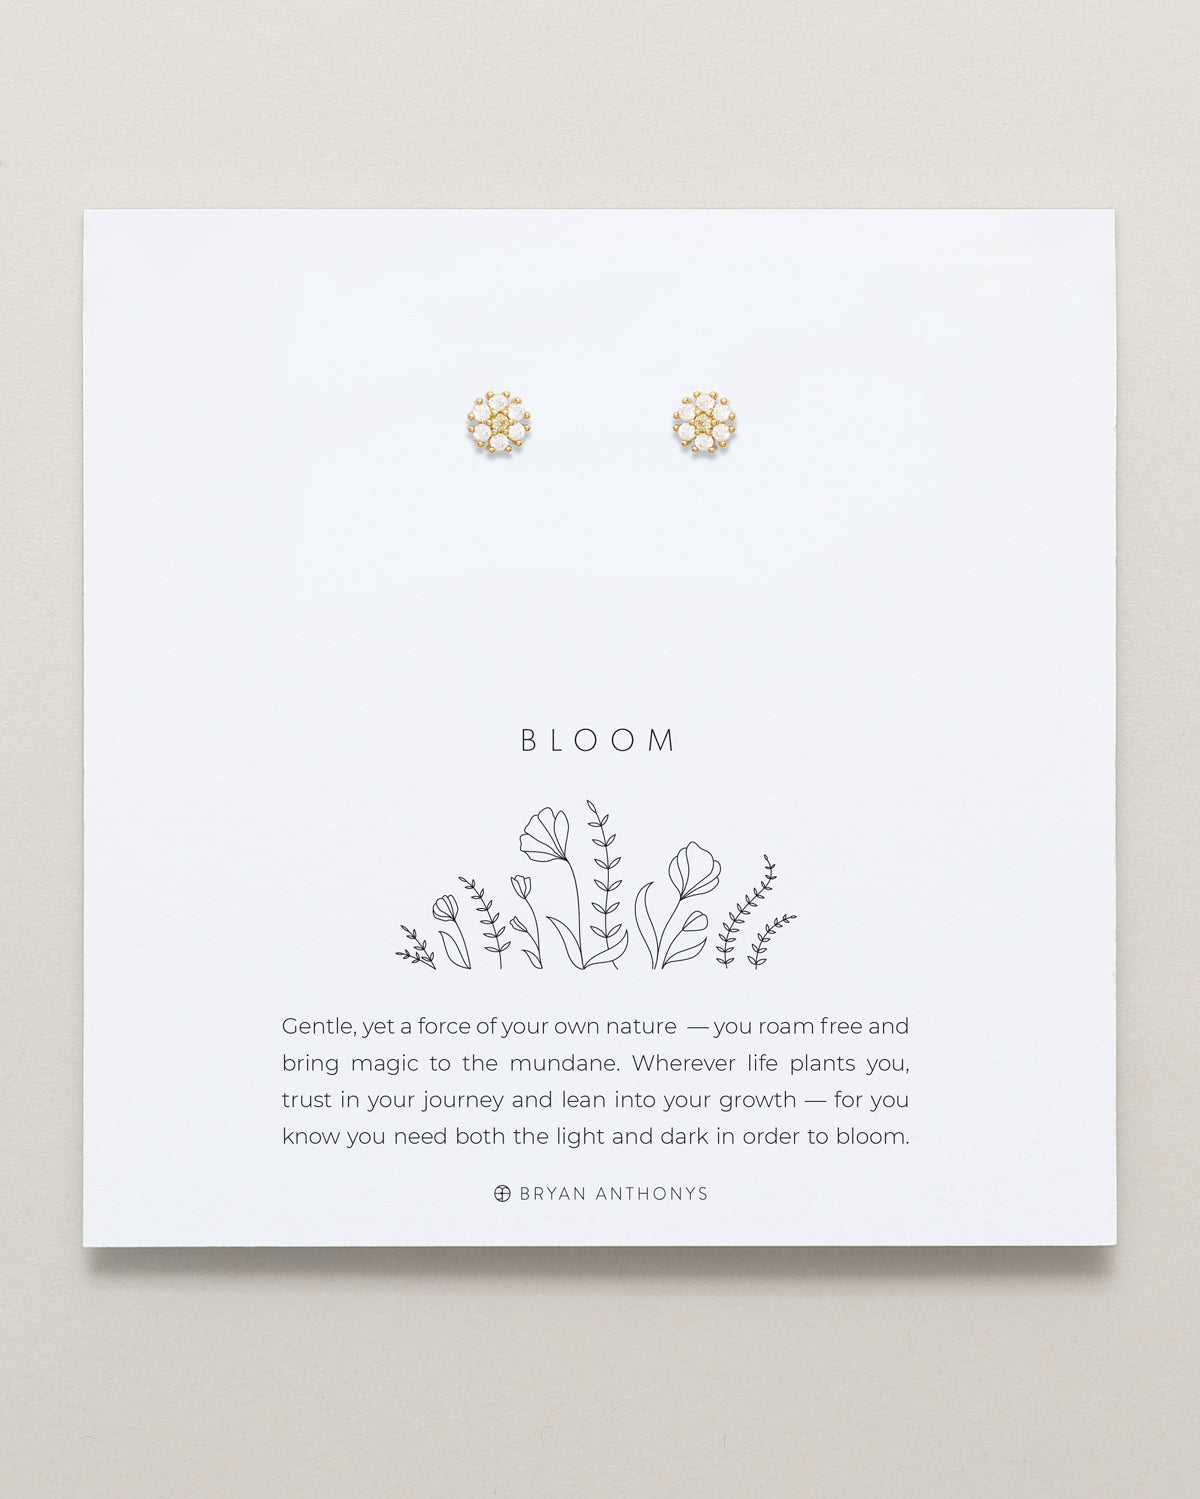 Bryan Anthonys Bloom Clear Gold Stud Earrings On Card